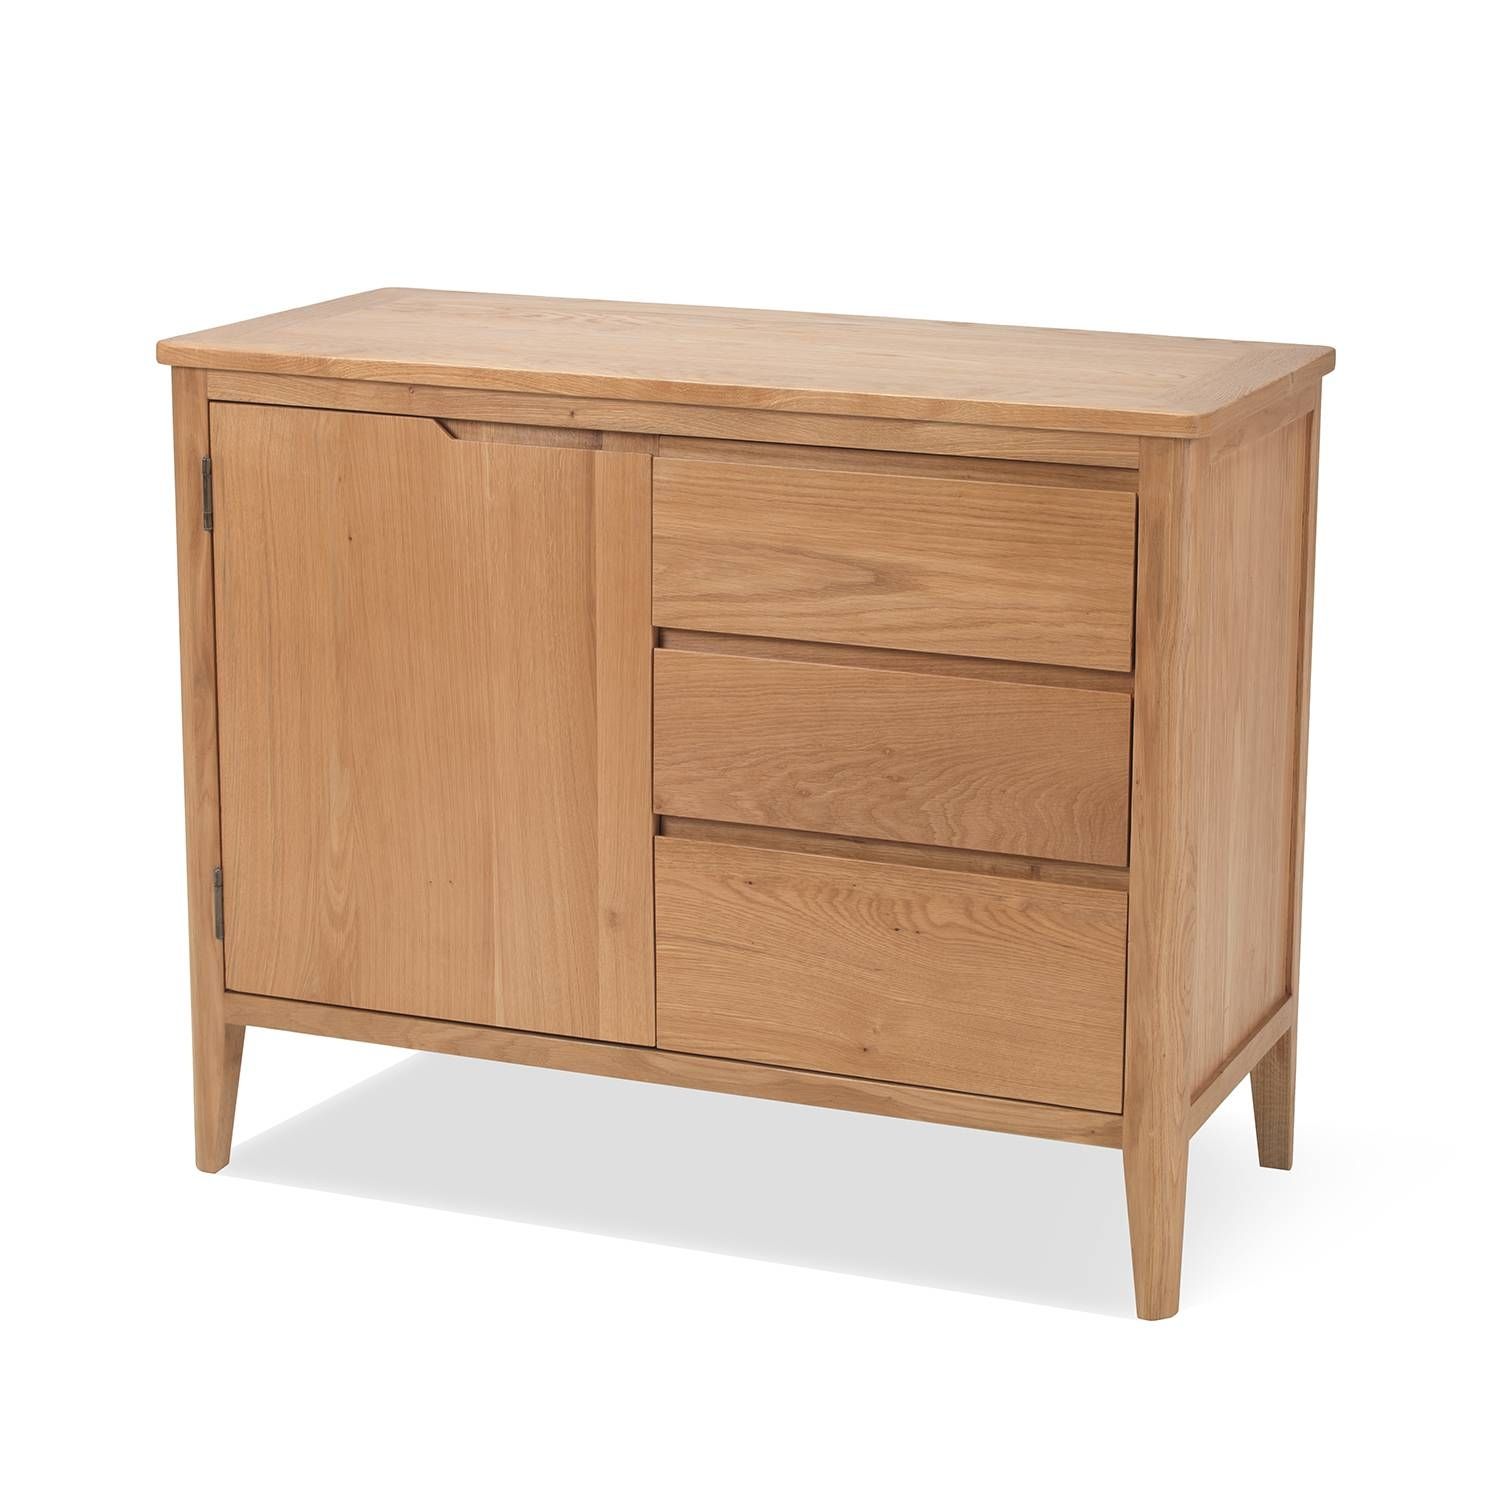 Cadley Oak Small Sideboard With Drawers – Lifestyle Furniture Uk In Small Sideboard (View 5 of 20)